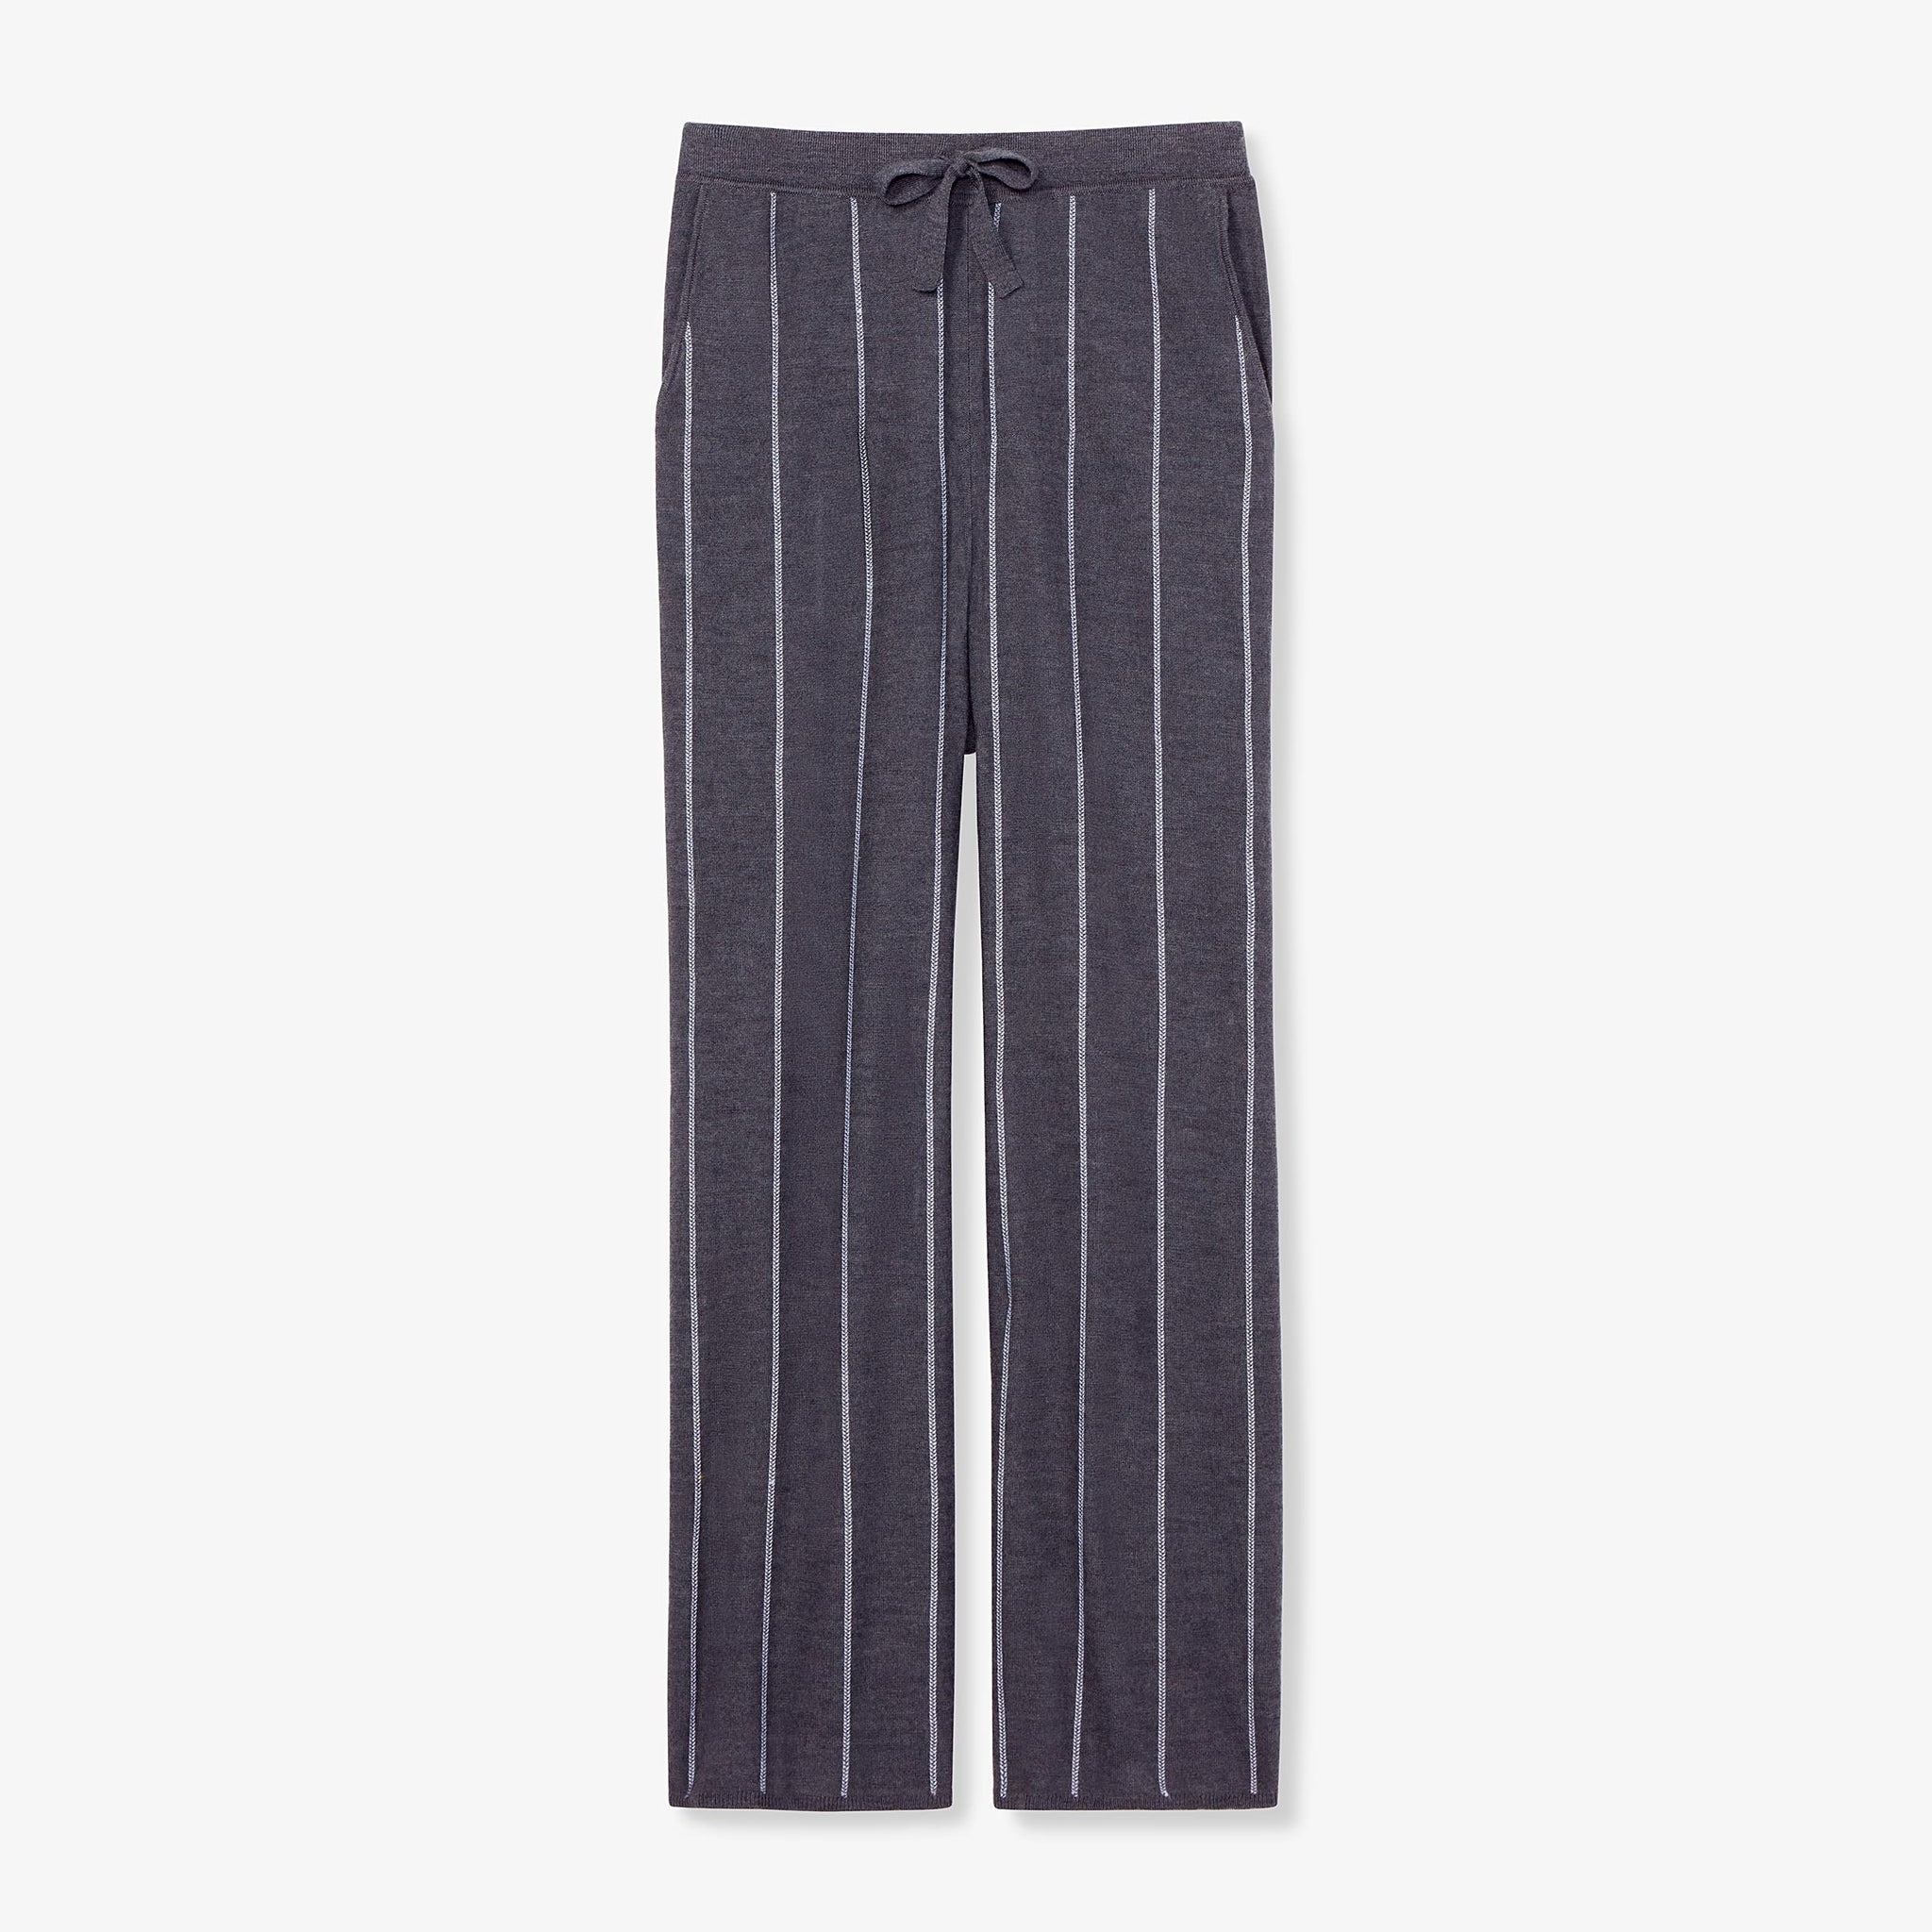 Packshot image of the tressa pant in braided stripe in charcoal and ivory